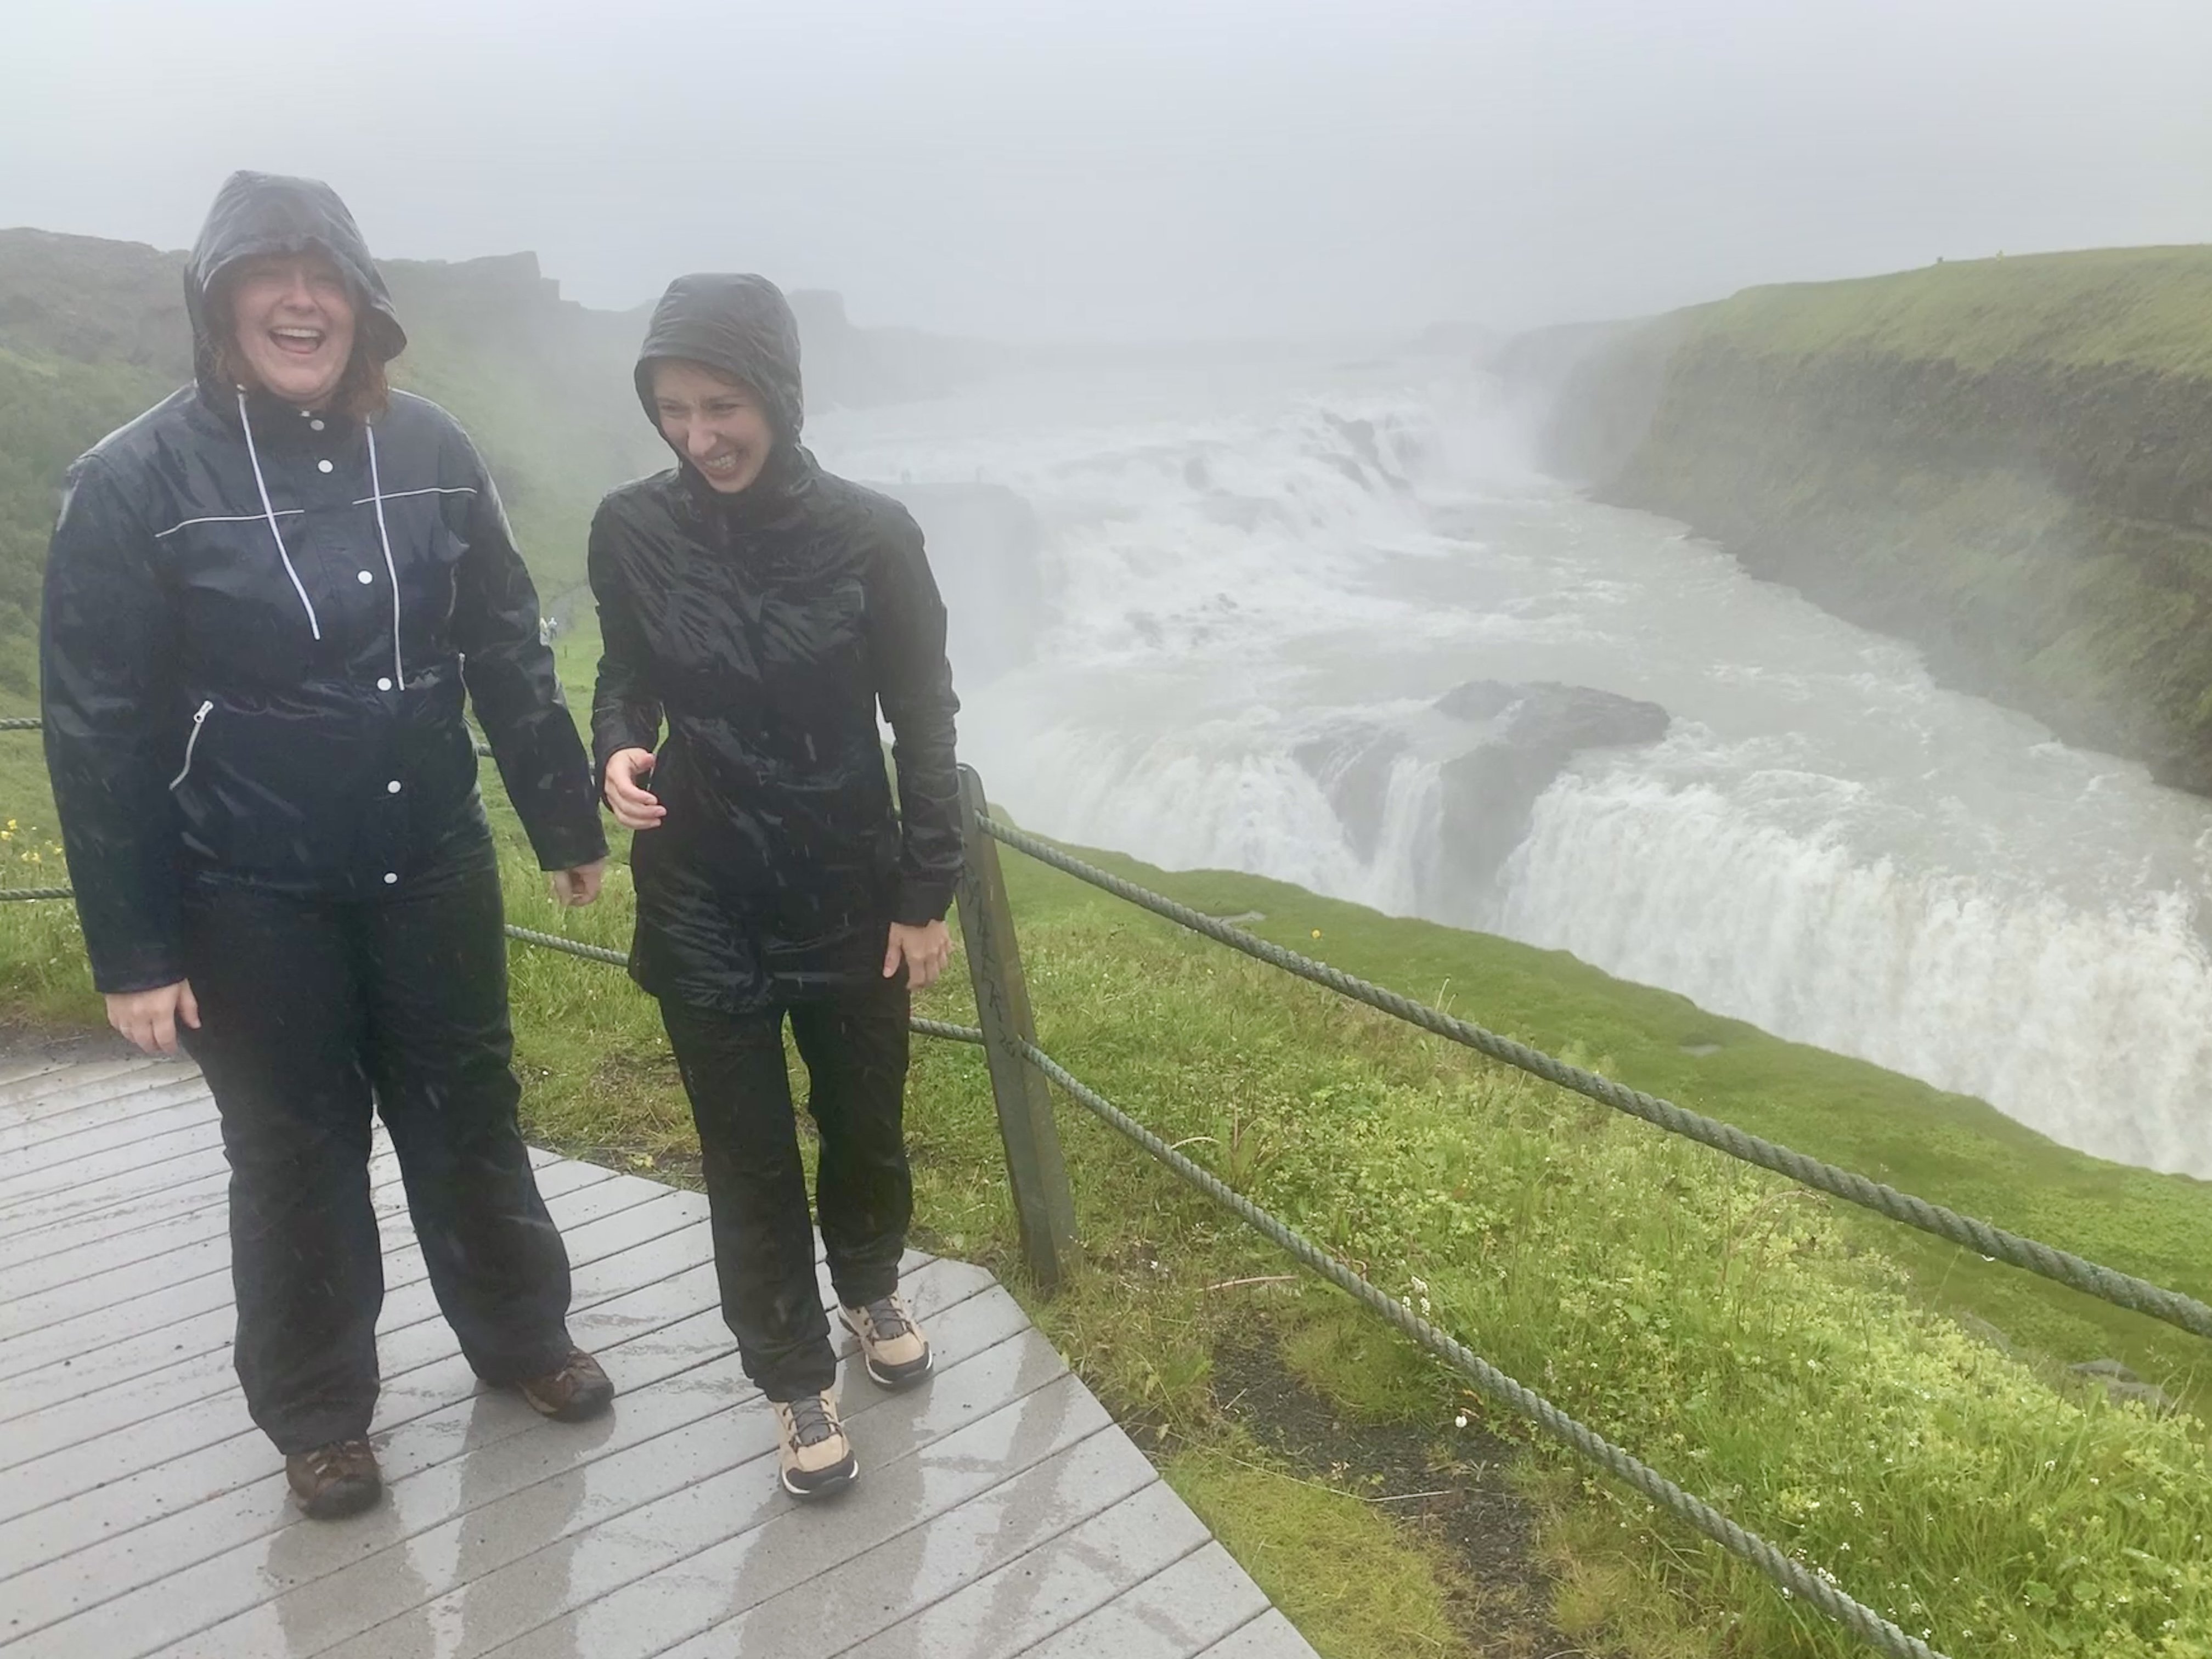 Merisa & Amanda soaked in mist with their hoods on after visiting Gullfoss